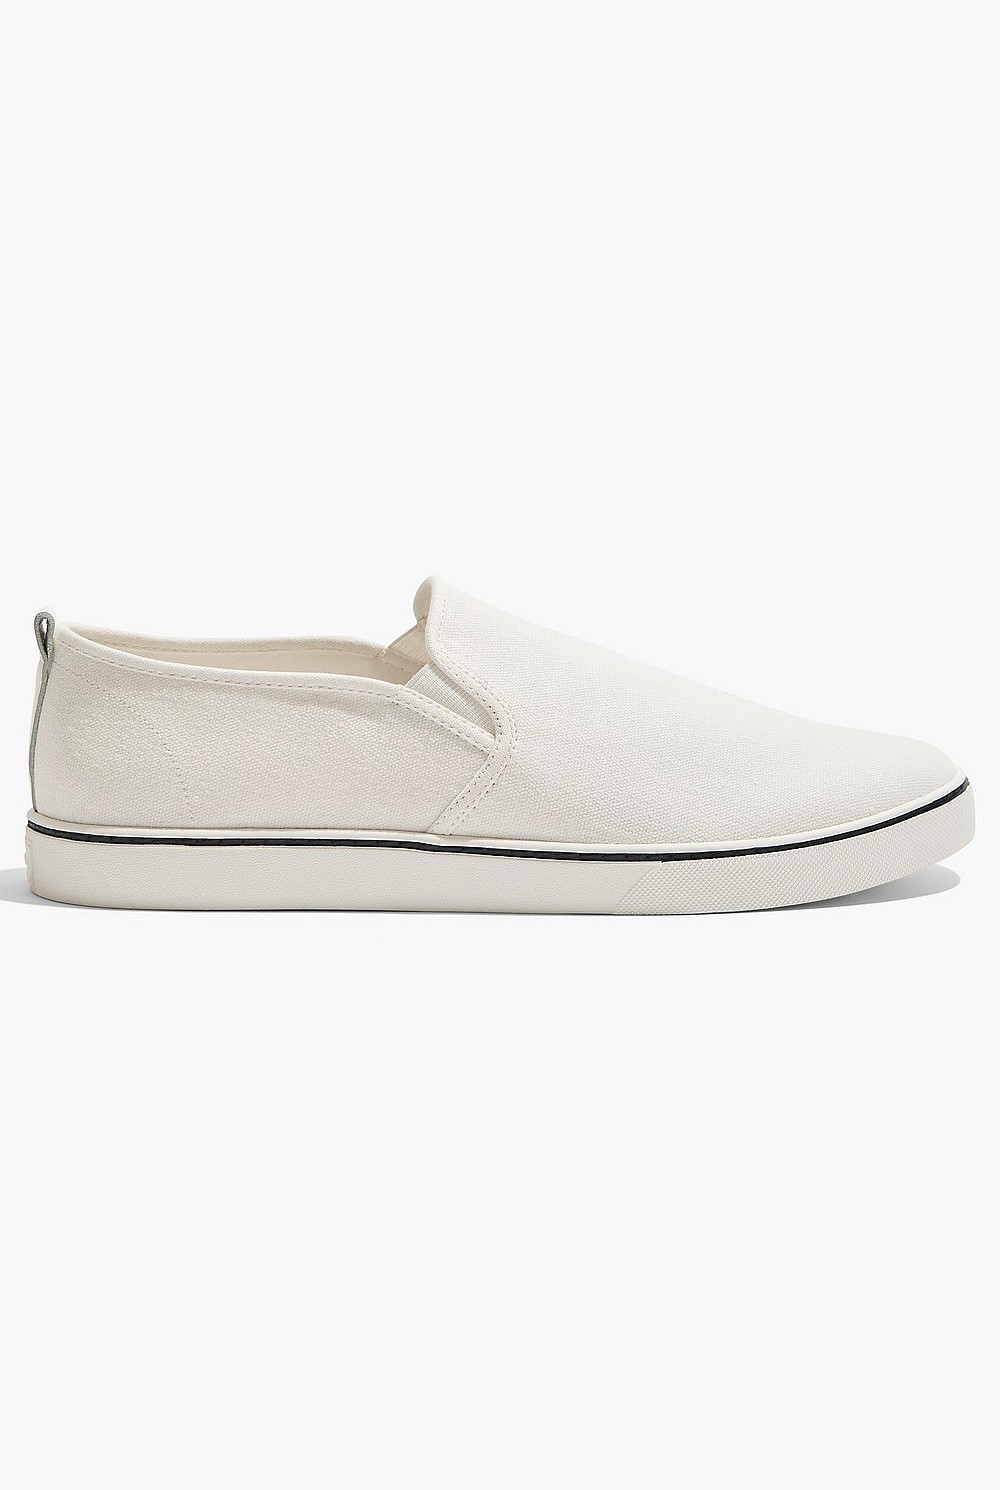 Canvas Slip On | Shoes